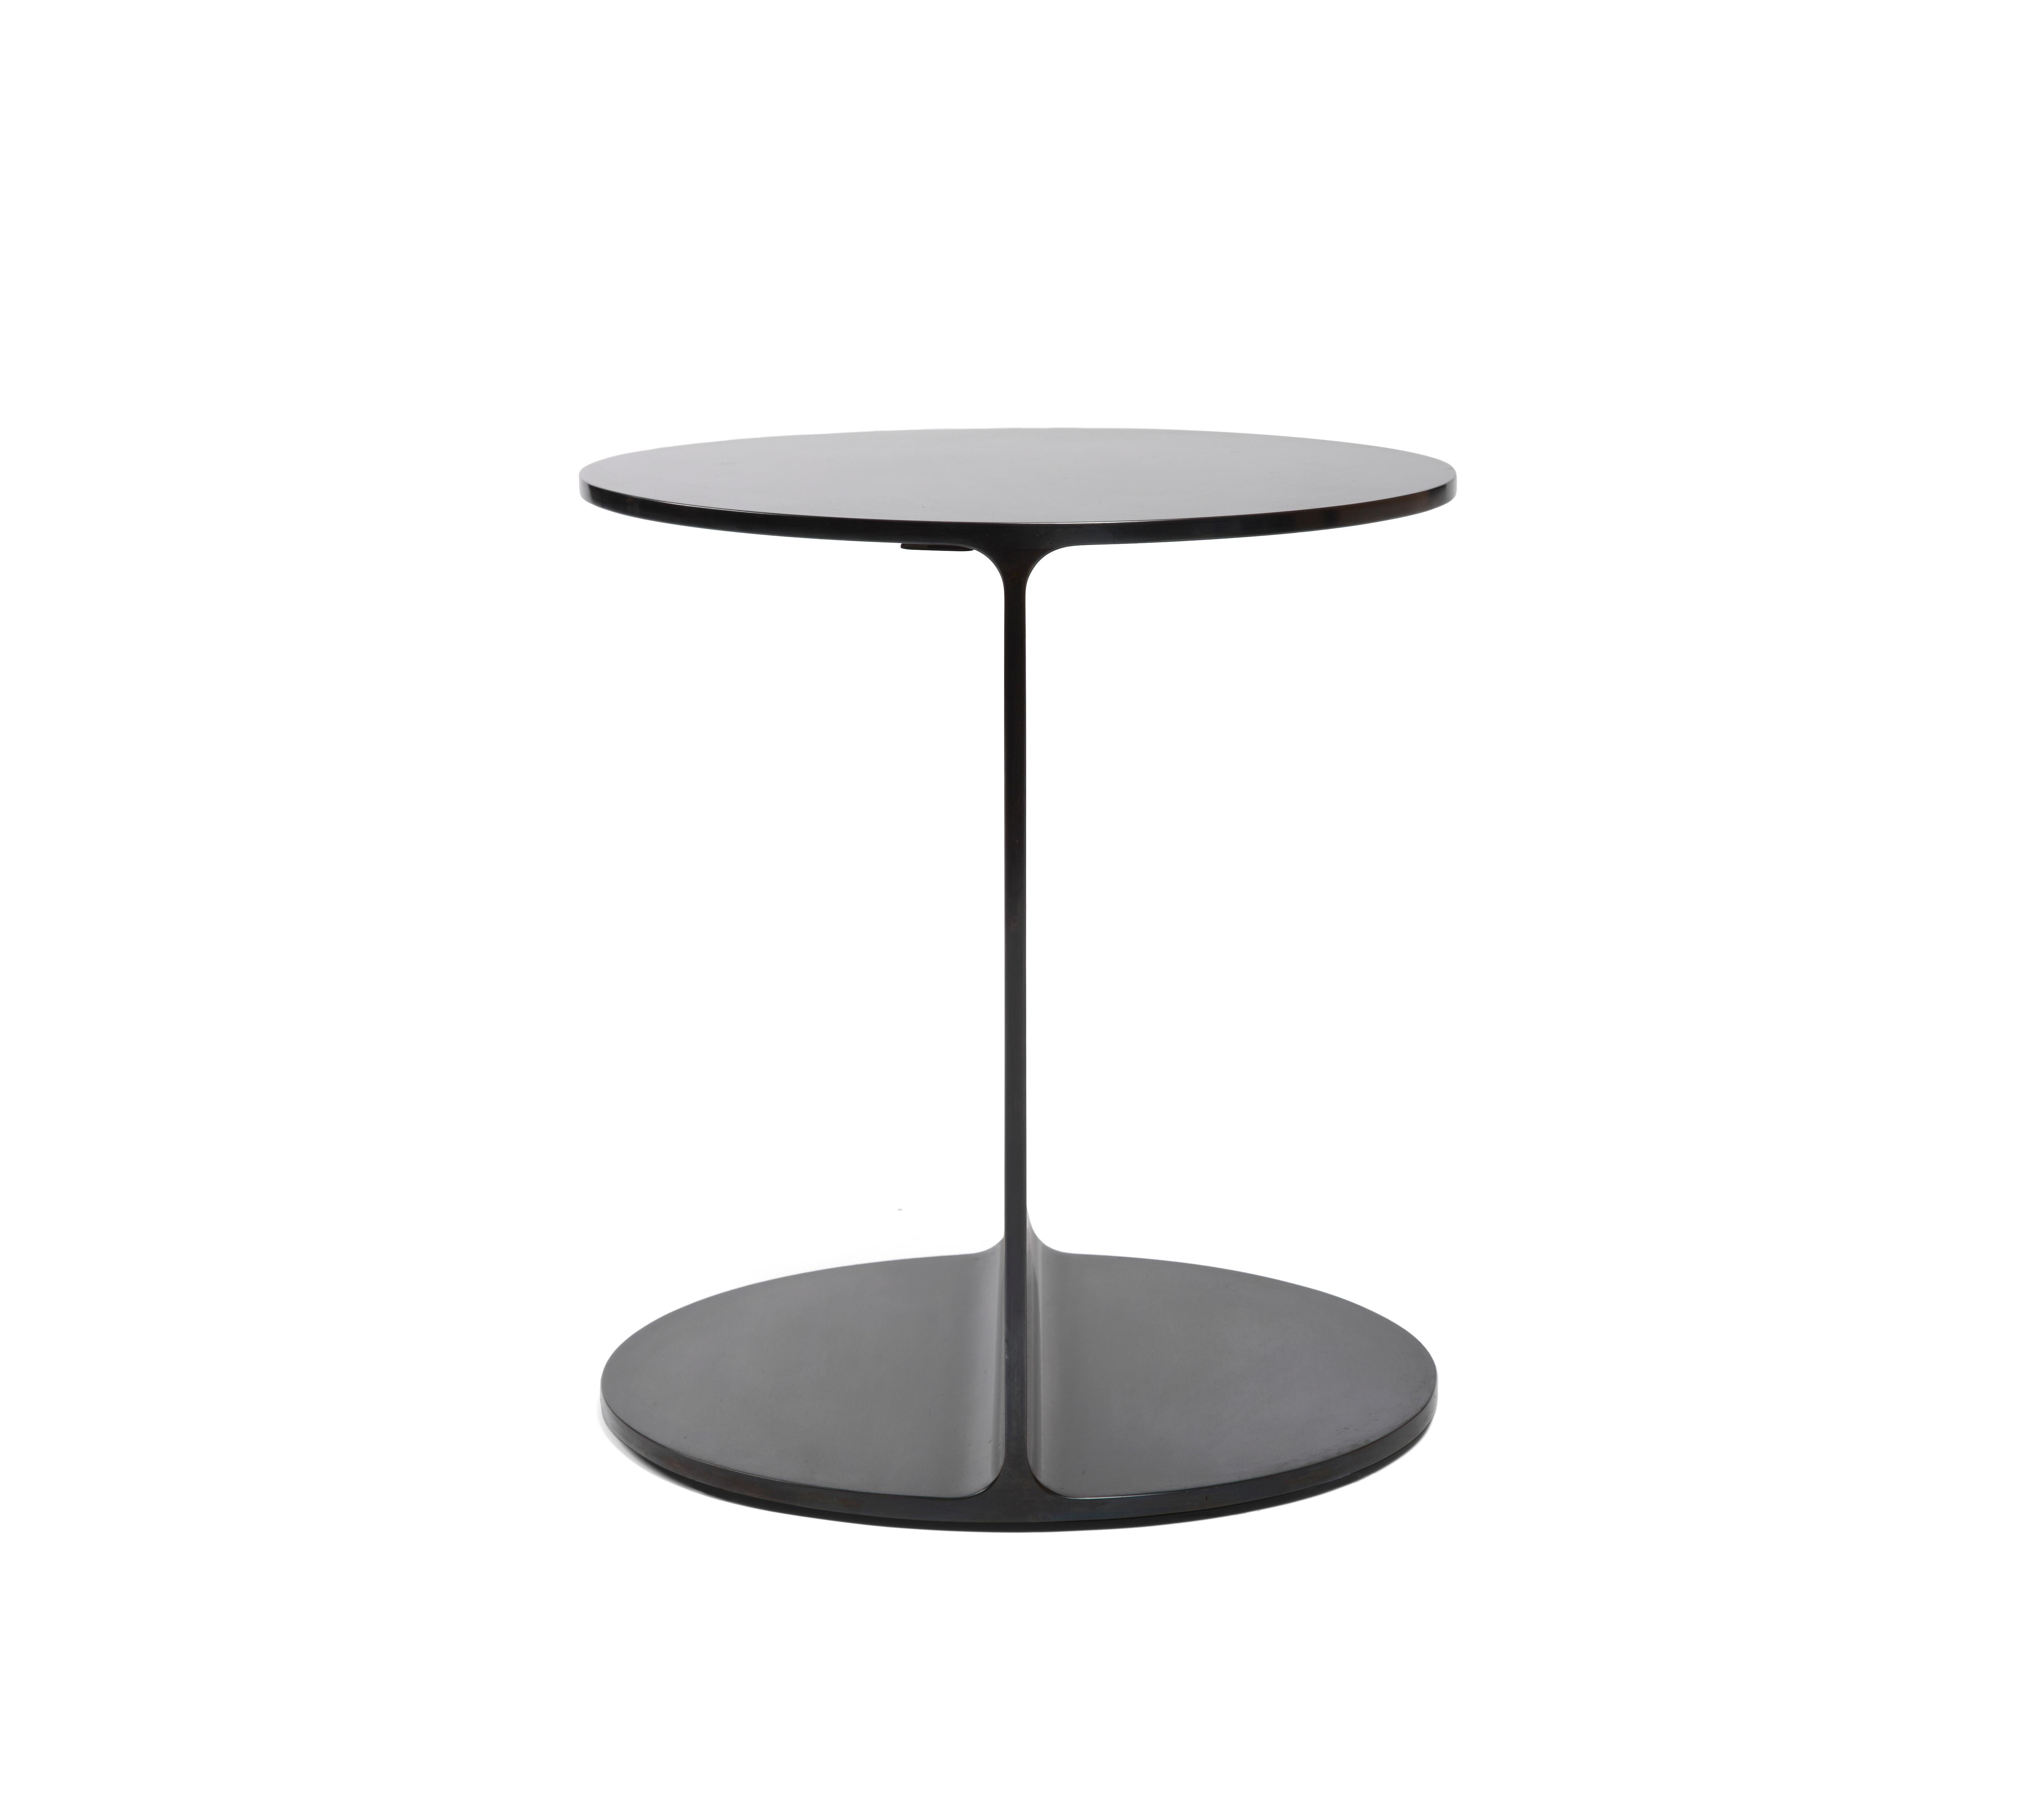 A Wyeth Original side table / end table, handcrafted in blackened natural steel. Produced by the Wyeth Workshop in NY. Also available in custom sizes and finishes.